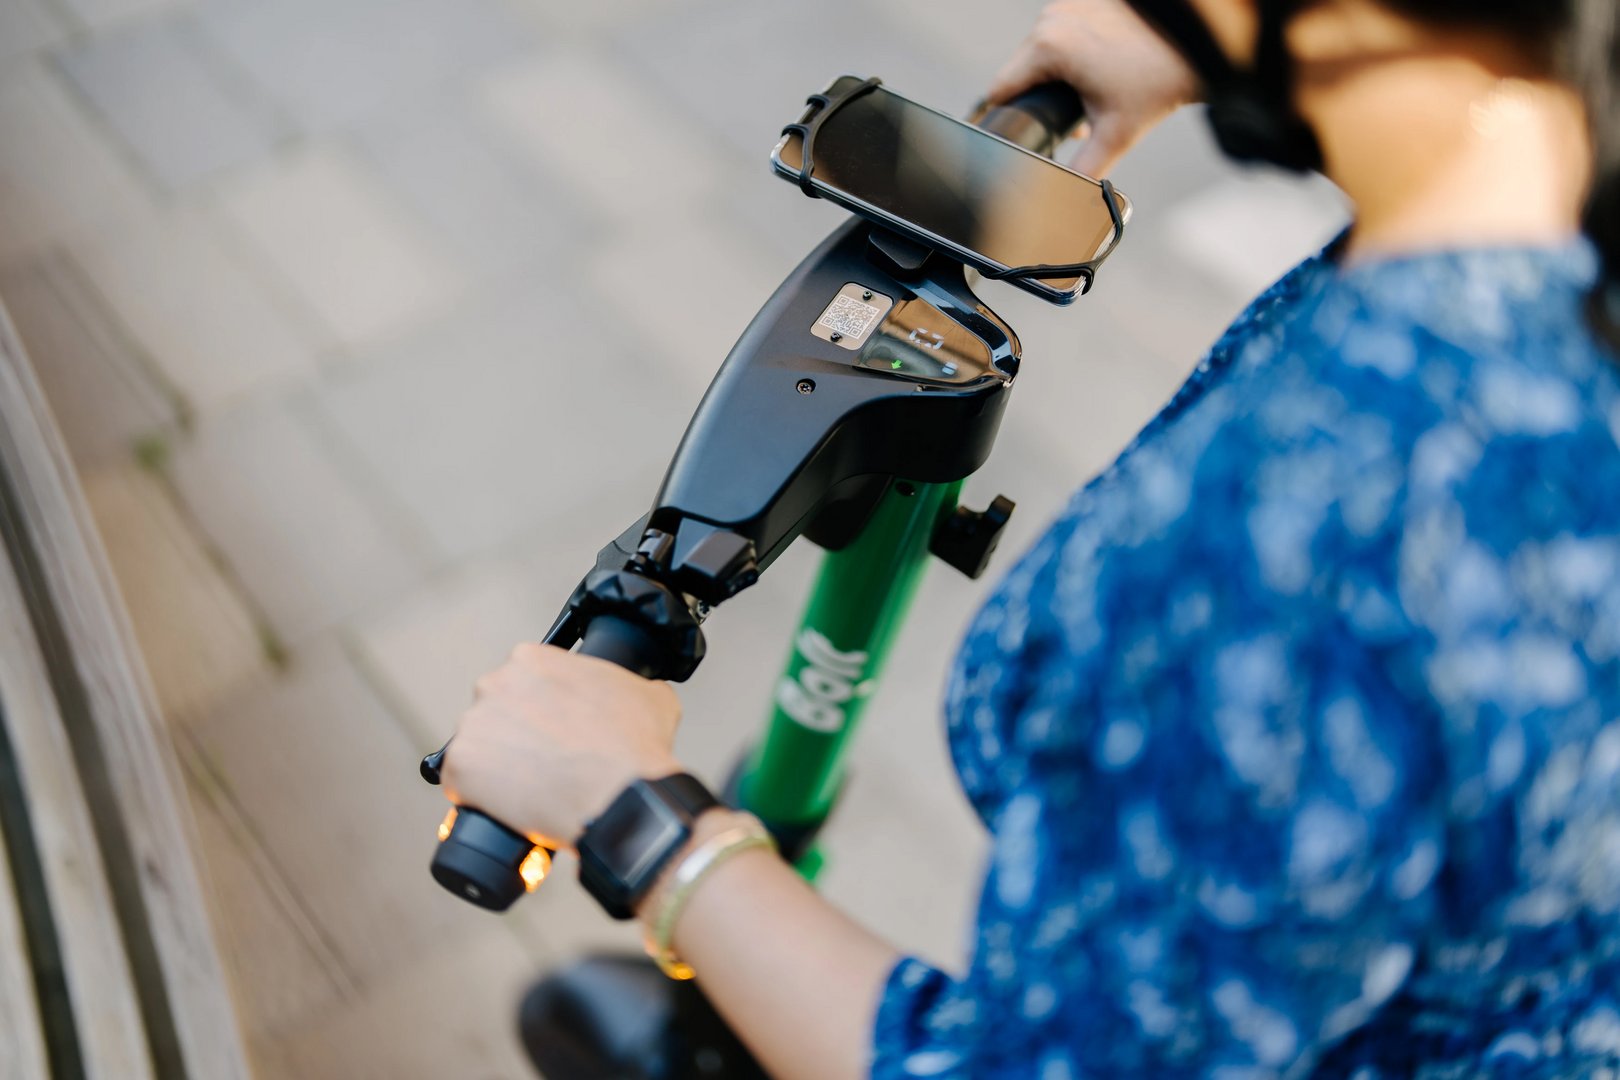 MP calls for scooters to be banned